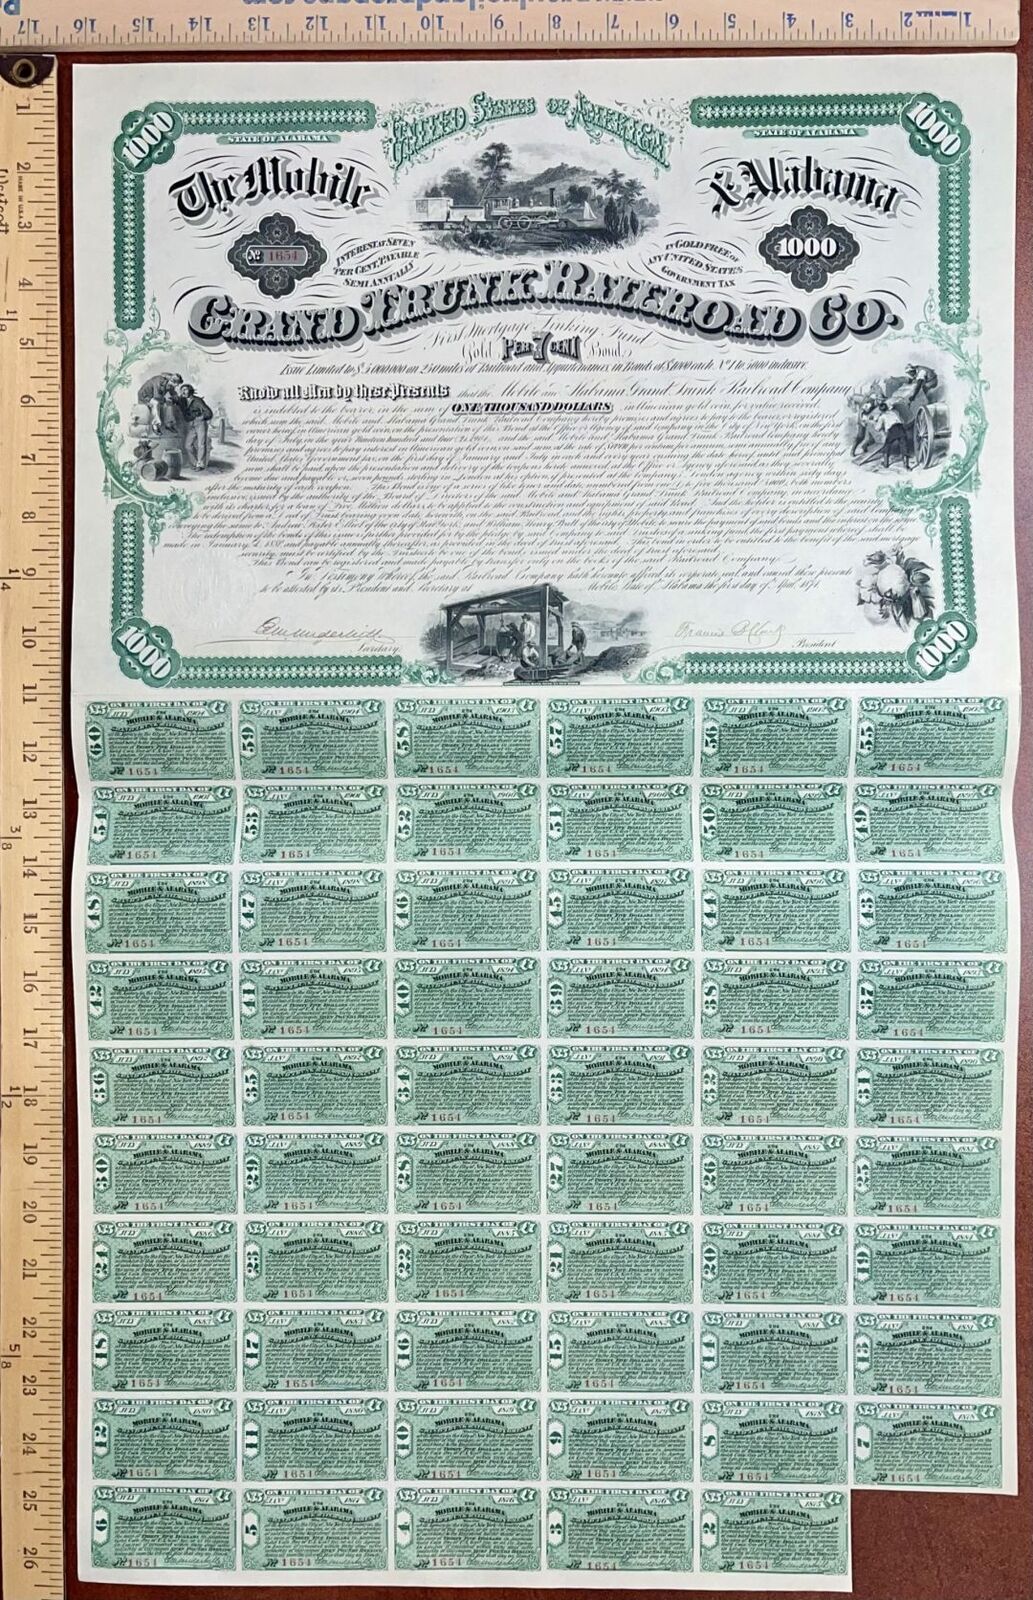 Mobile and Alabama Grand Trunk Railroad Co. - 1874 dated $1,000 7% Railway Gold 